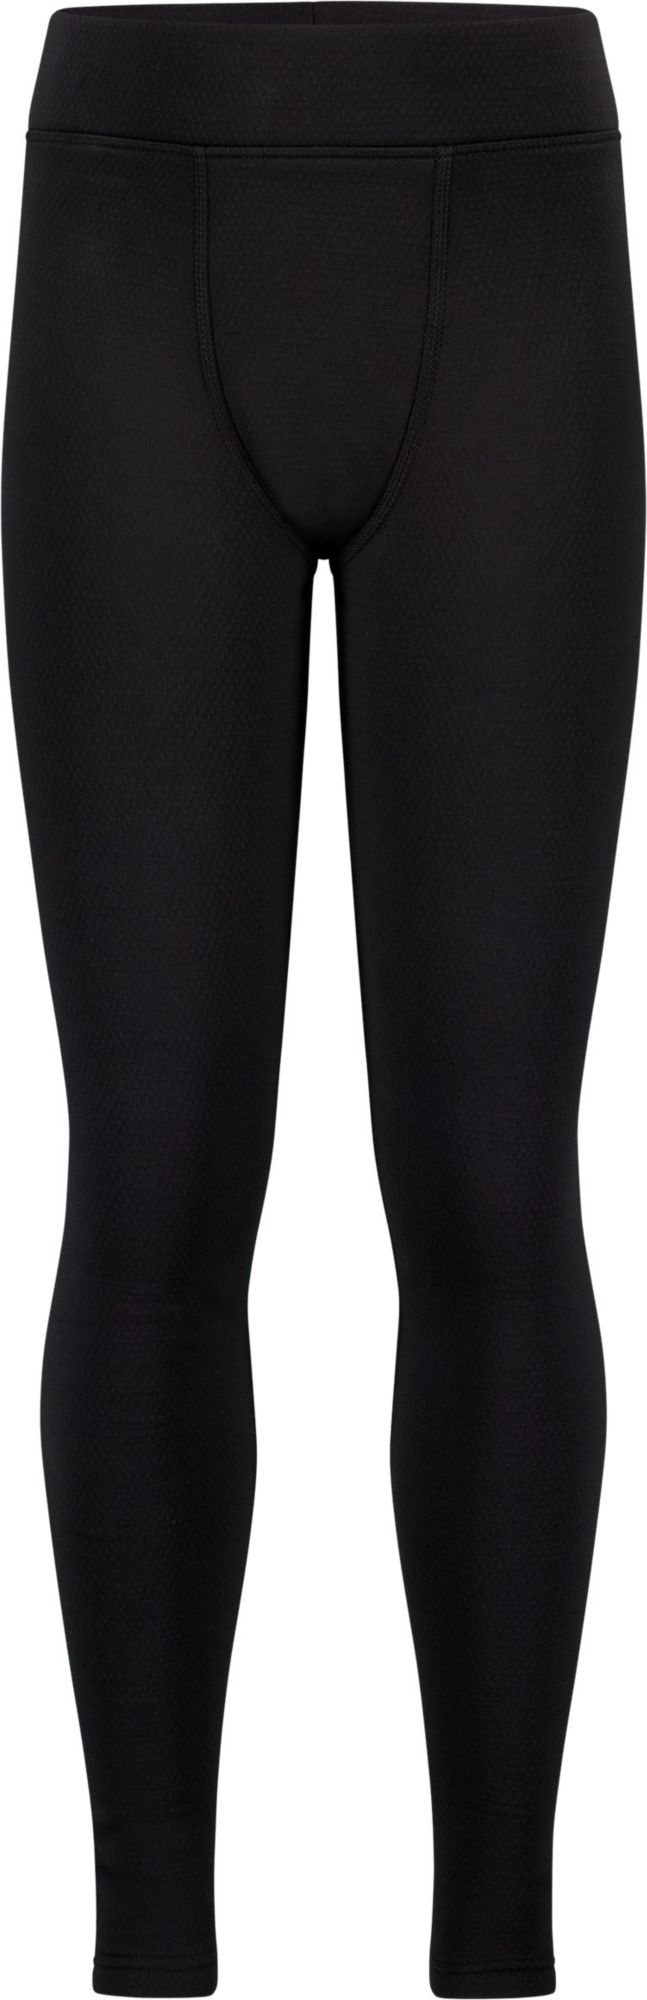 under armour youth leggings